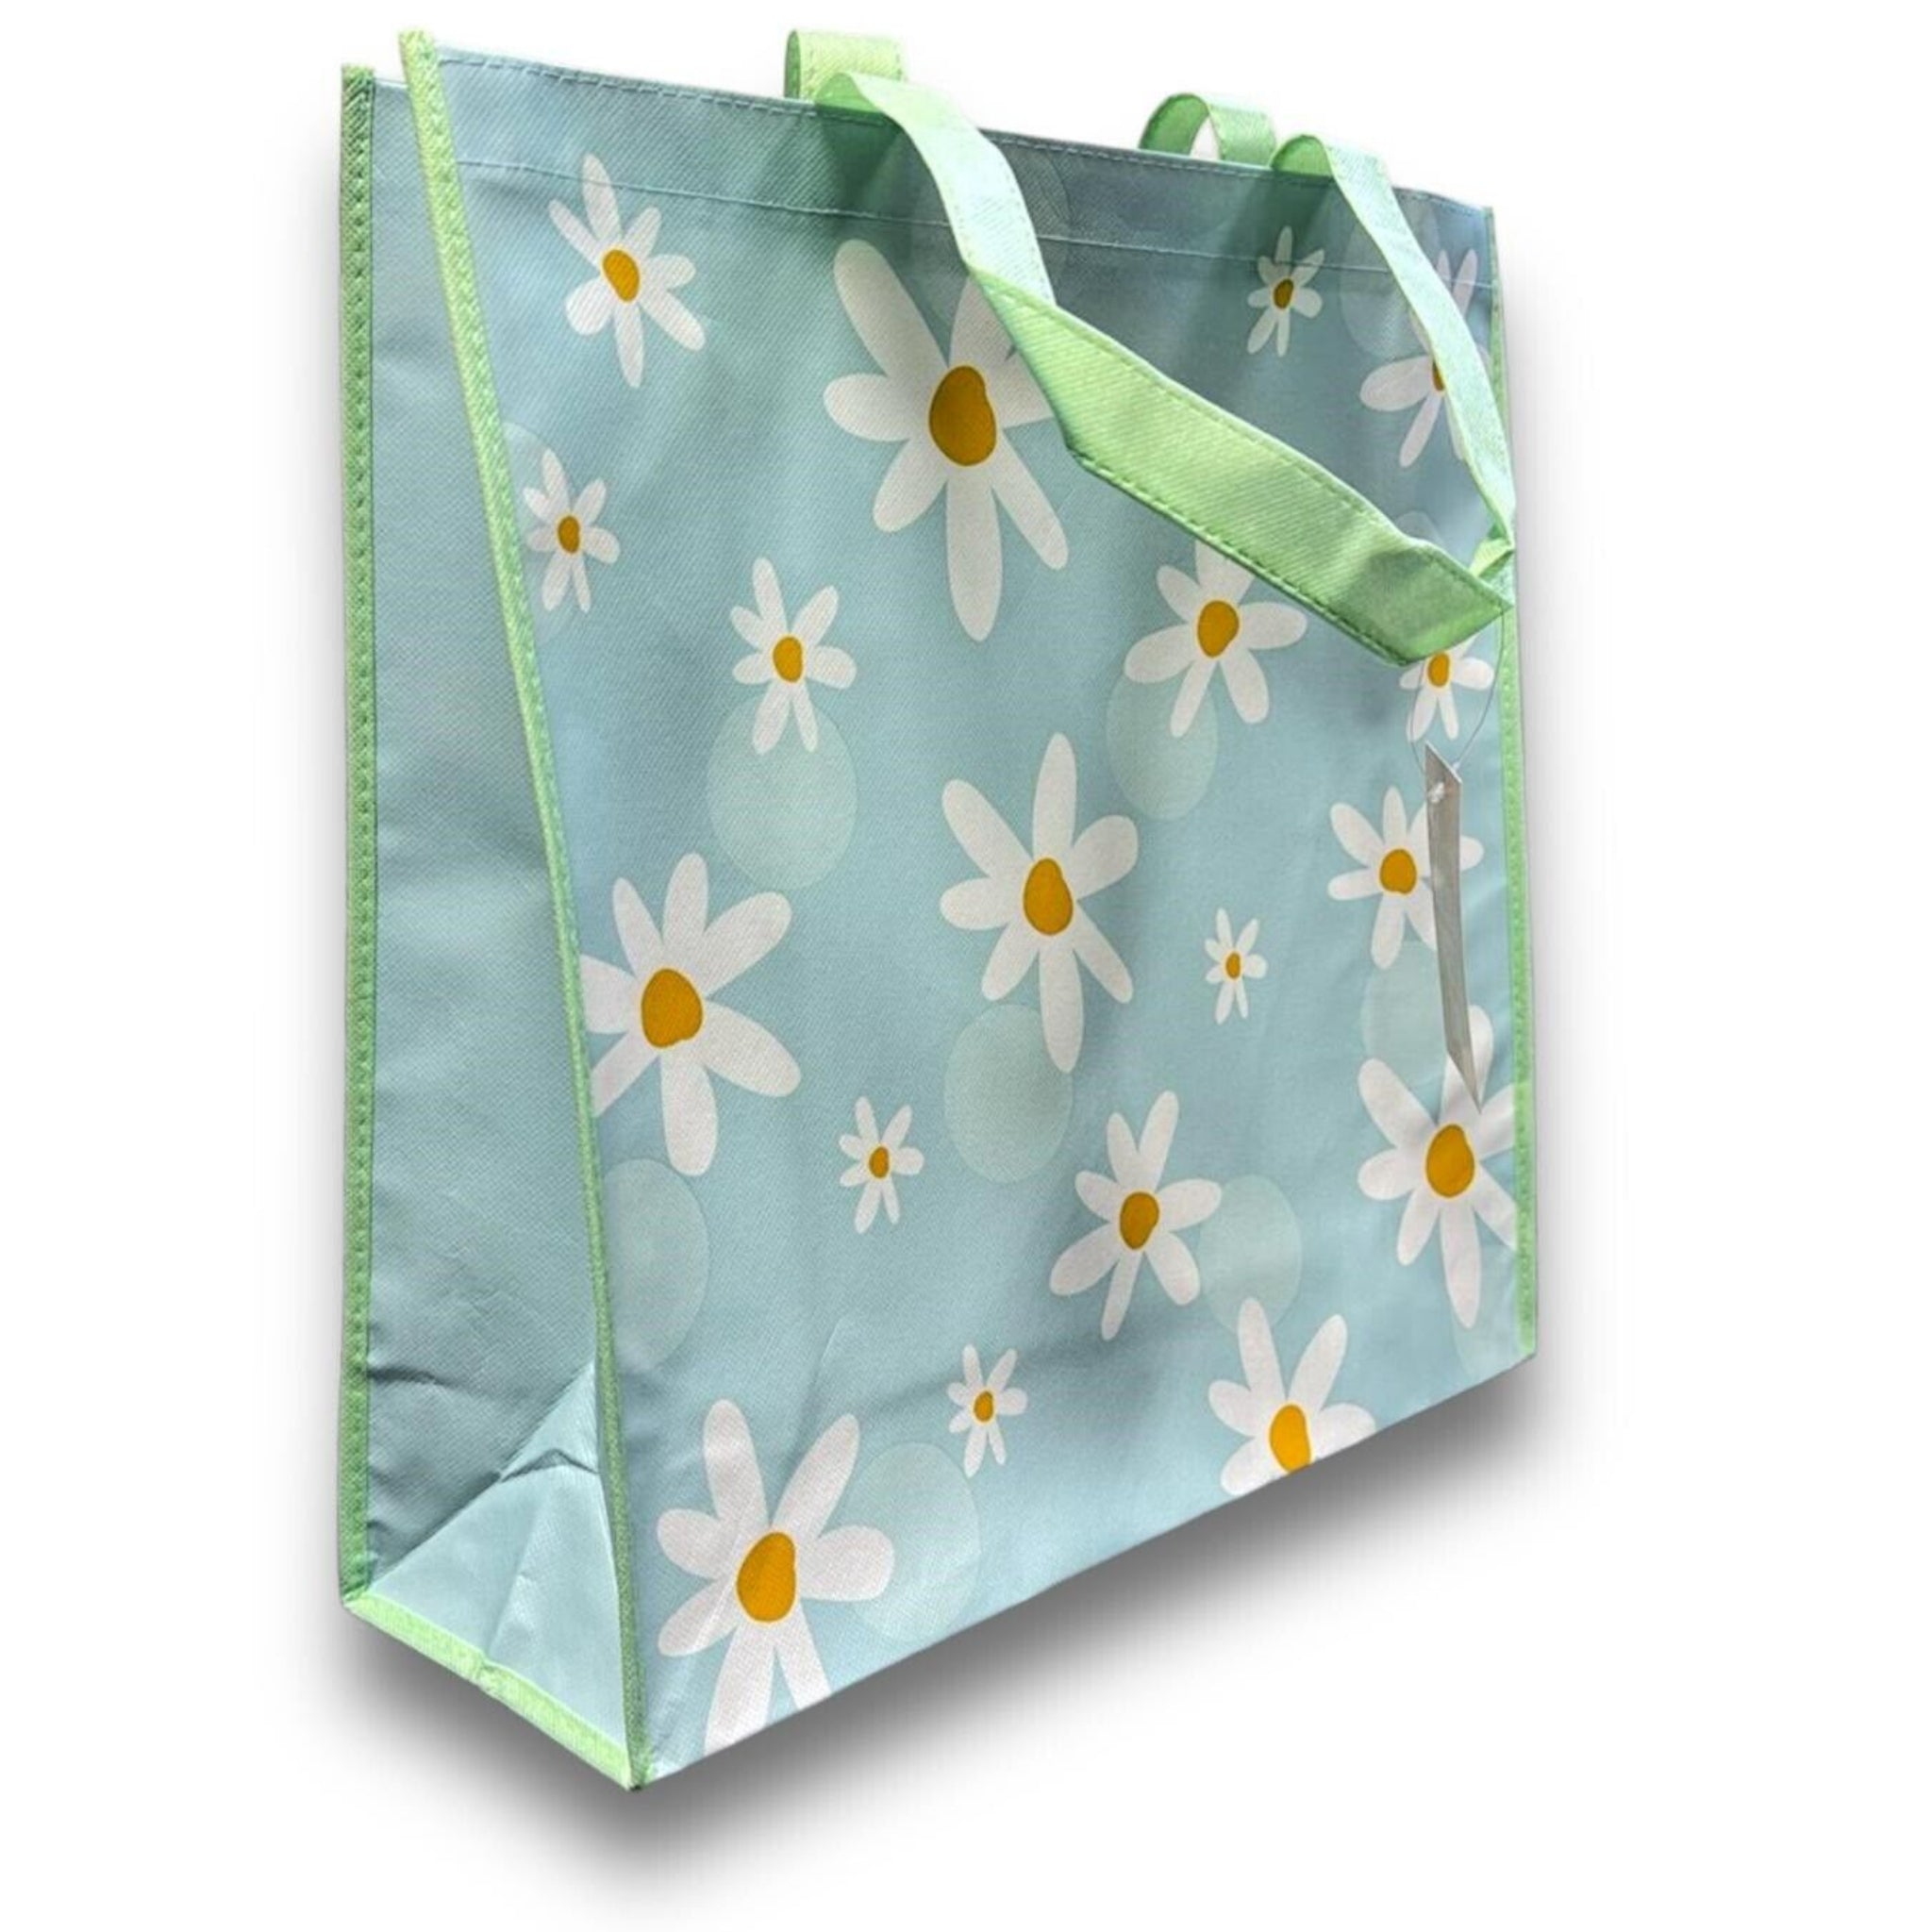 Beclen Harp 2 x Easter Christmas Gift Bags Tote Bag Non Woven Fabric Gift Party Present Bags